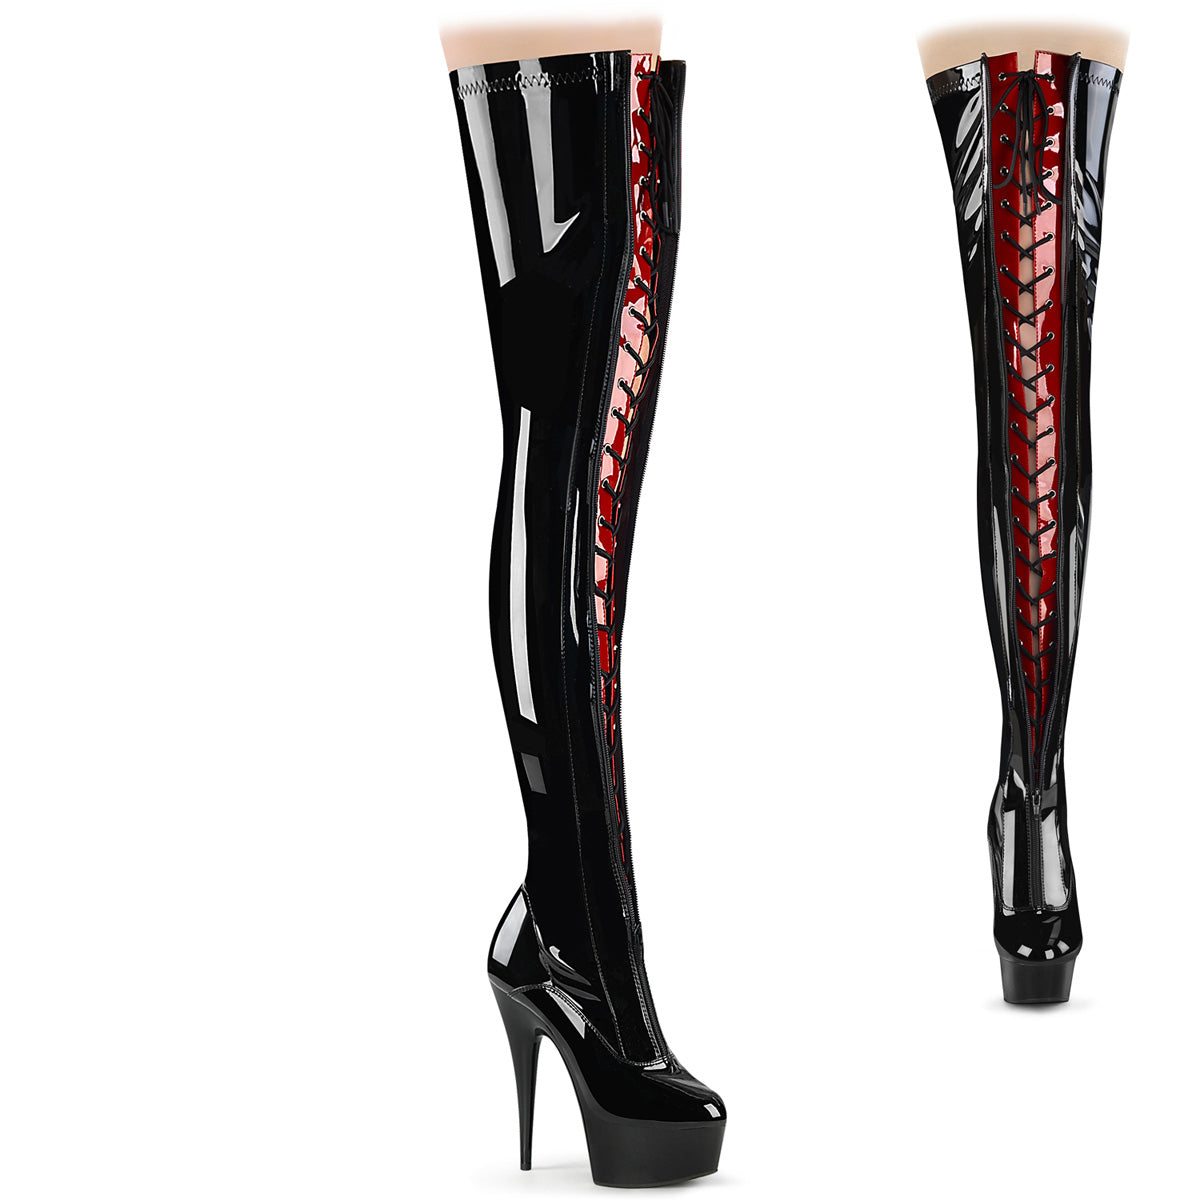 Pleaser DELIGHT-3027 Black-Red Stretch Pat 6 Inch (152mm) Heel, 1 3/4 Inch (45mm) Platform Two Tone Lace-Up/ Zip-UpThigh High Boot, Full Length Front Zip & 10 Inch Back Zip Closure